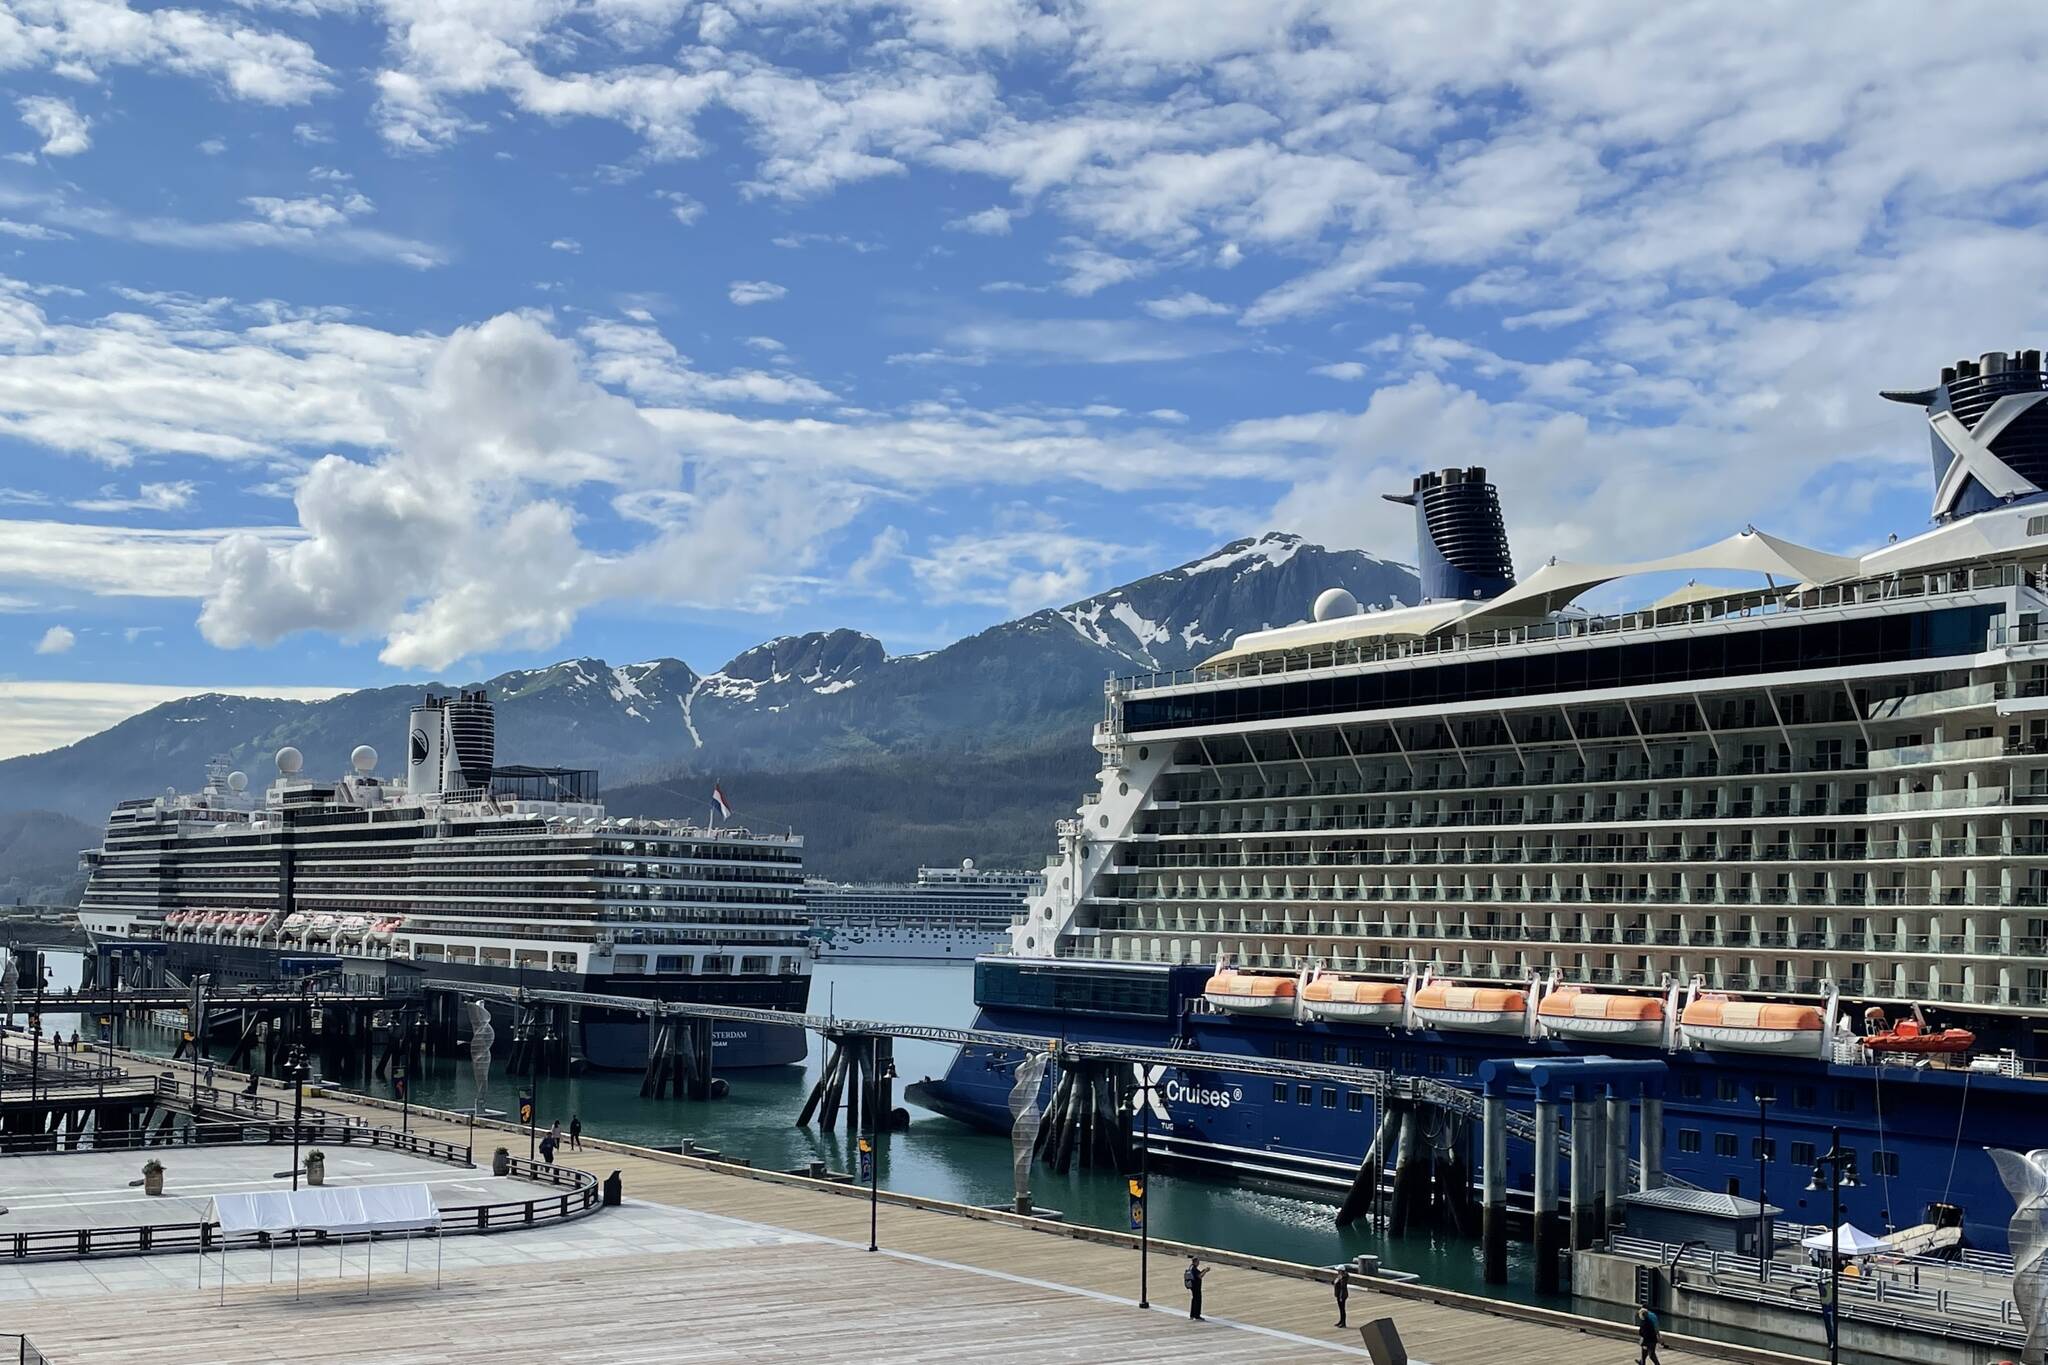 Cruise ships lay moored alongside the piers downtown on July 14, 2022. (Michael S. Lockett / Juneau Empire)